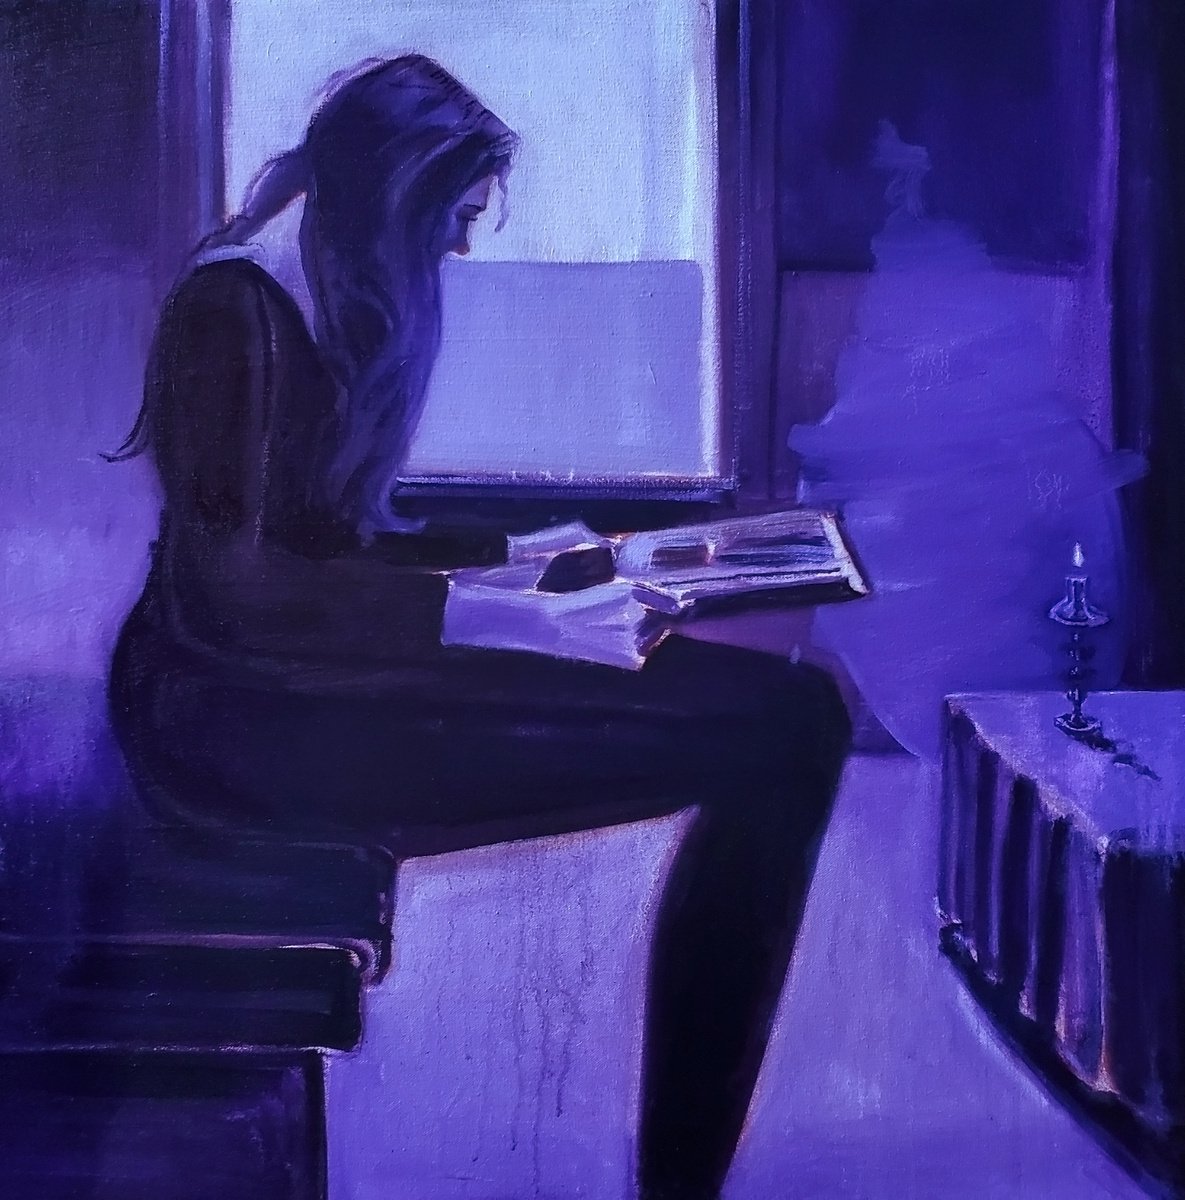 Tall Reader in a Quiet Violet Interior by Shelton Walsmith